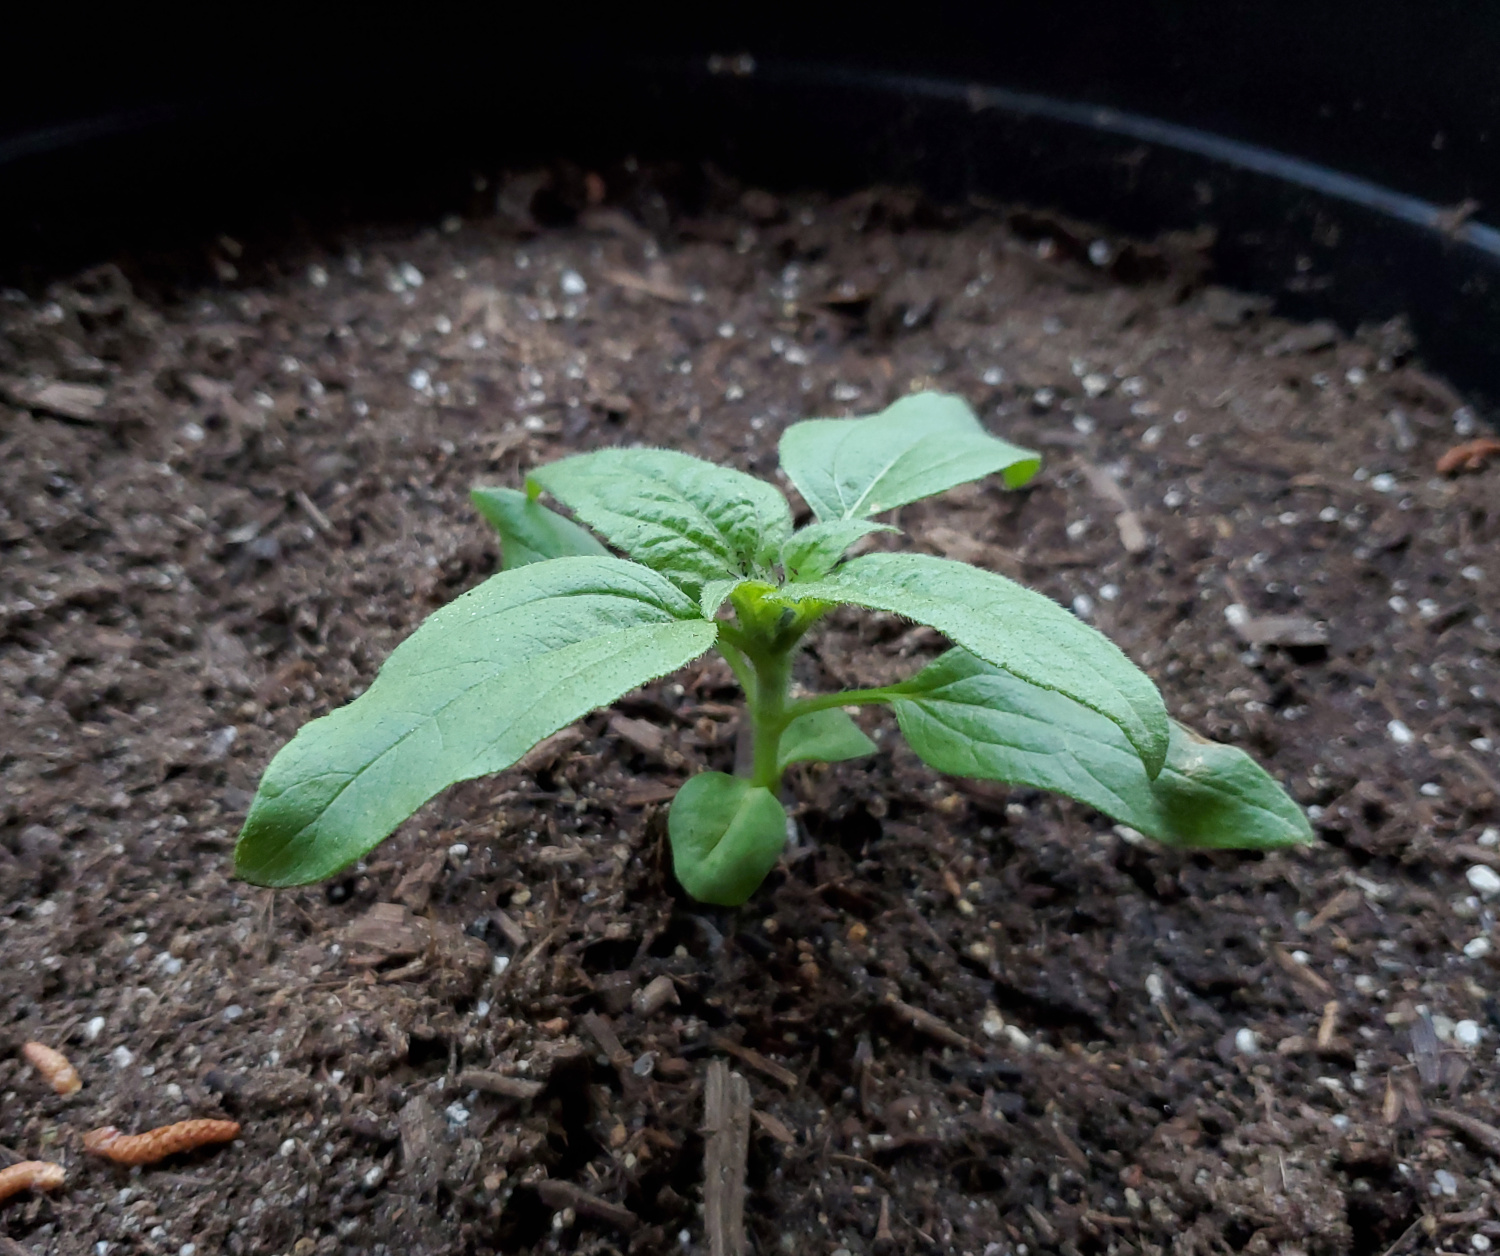 A sunflower seedling alone in a large pot outdoors